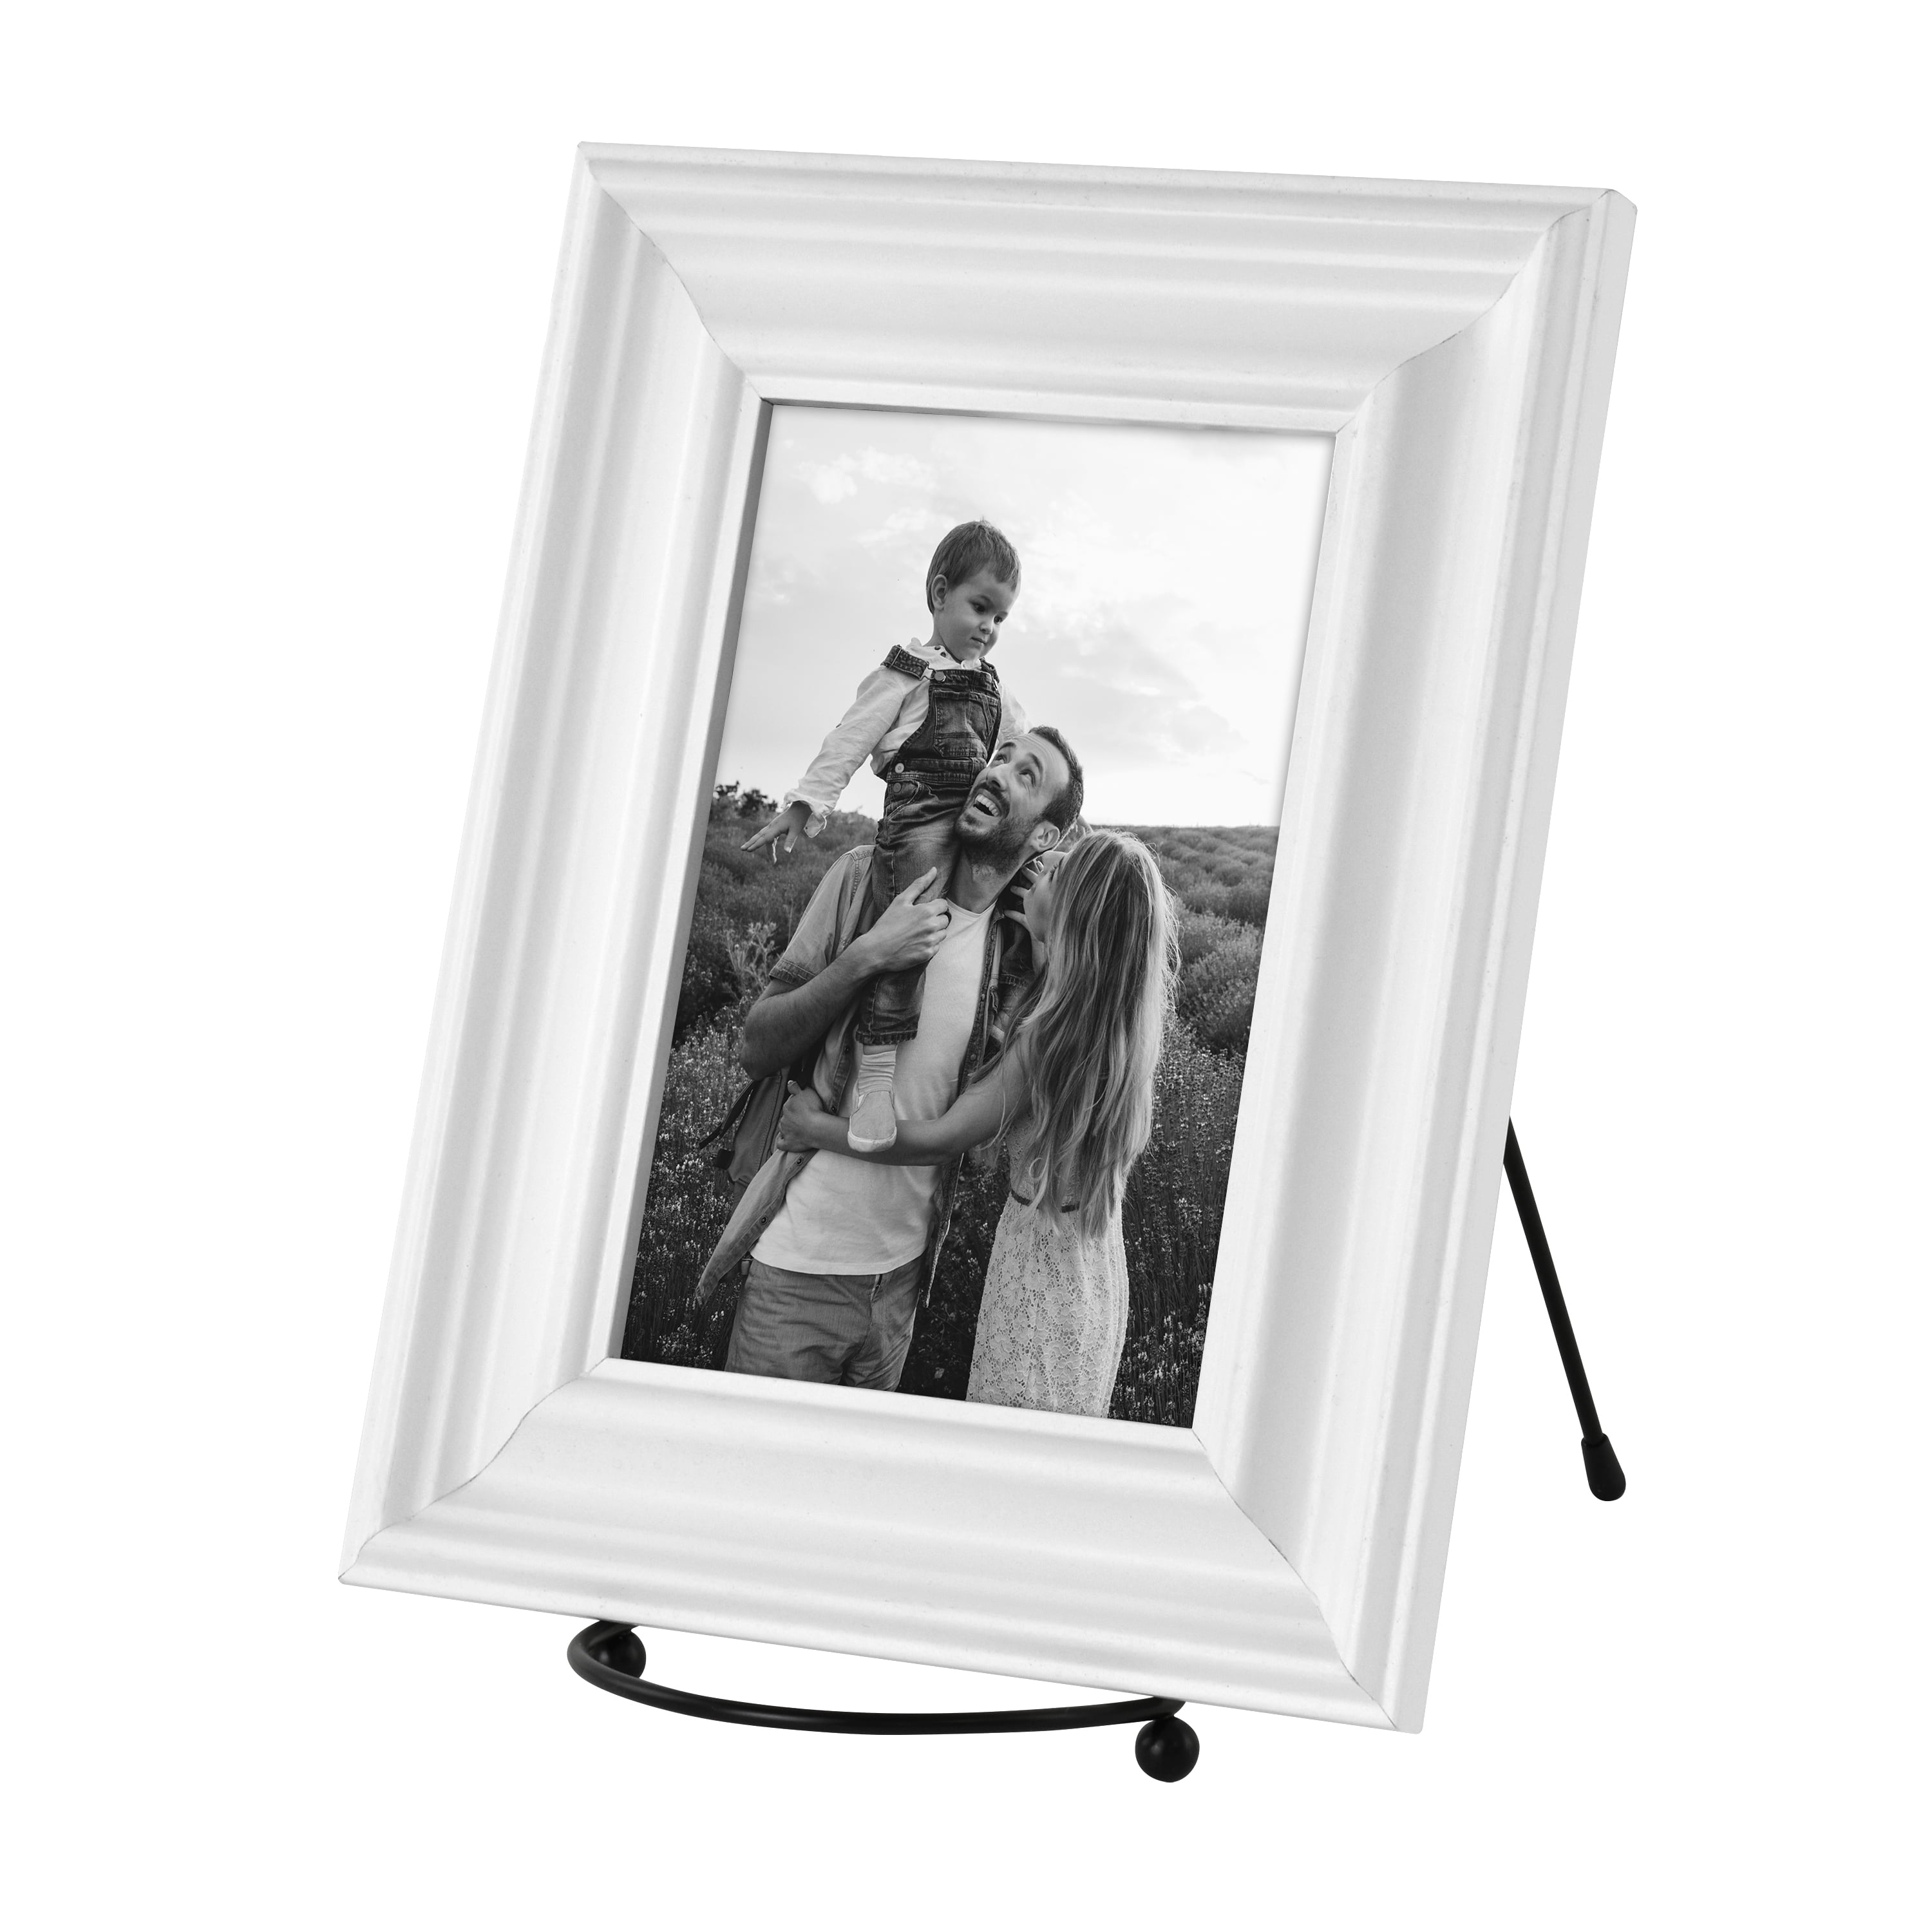 Mainstays 6 Classic Black Metal Picture Frame Easel 